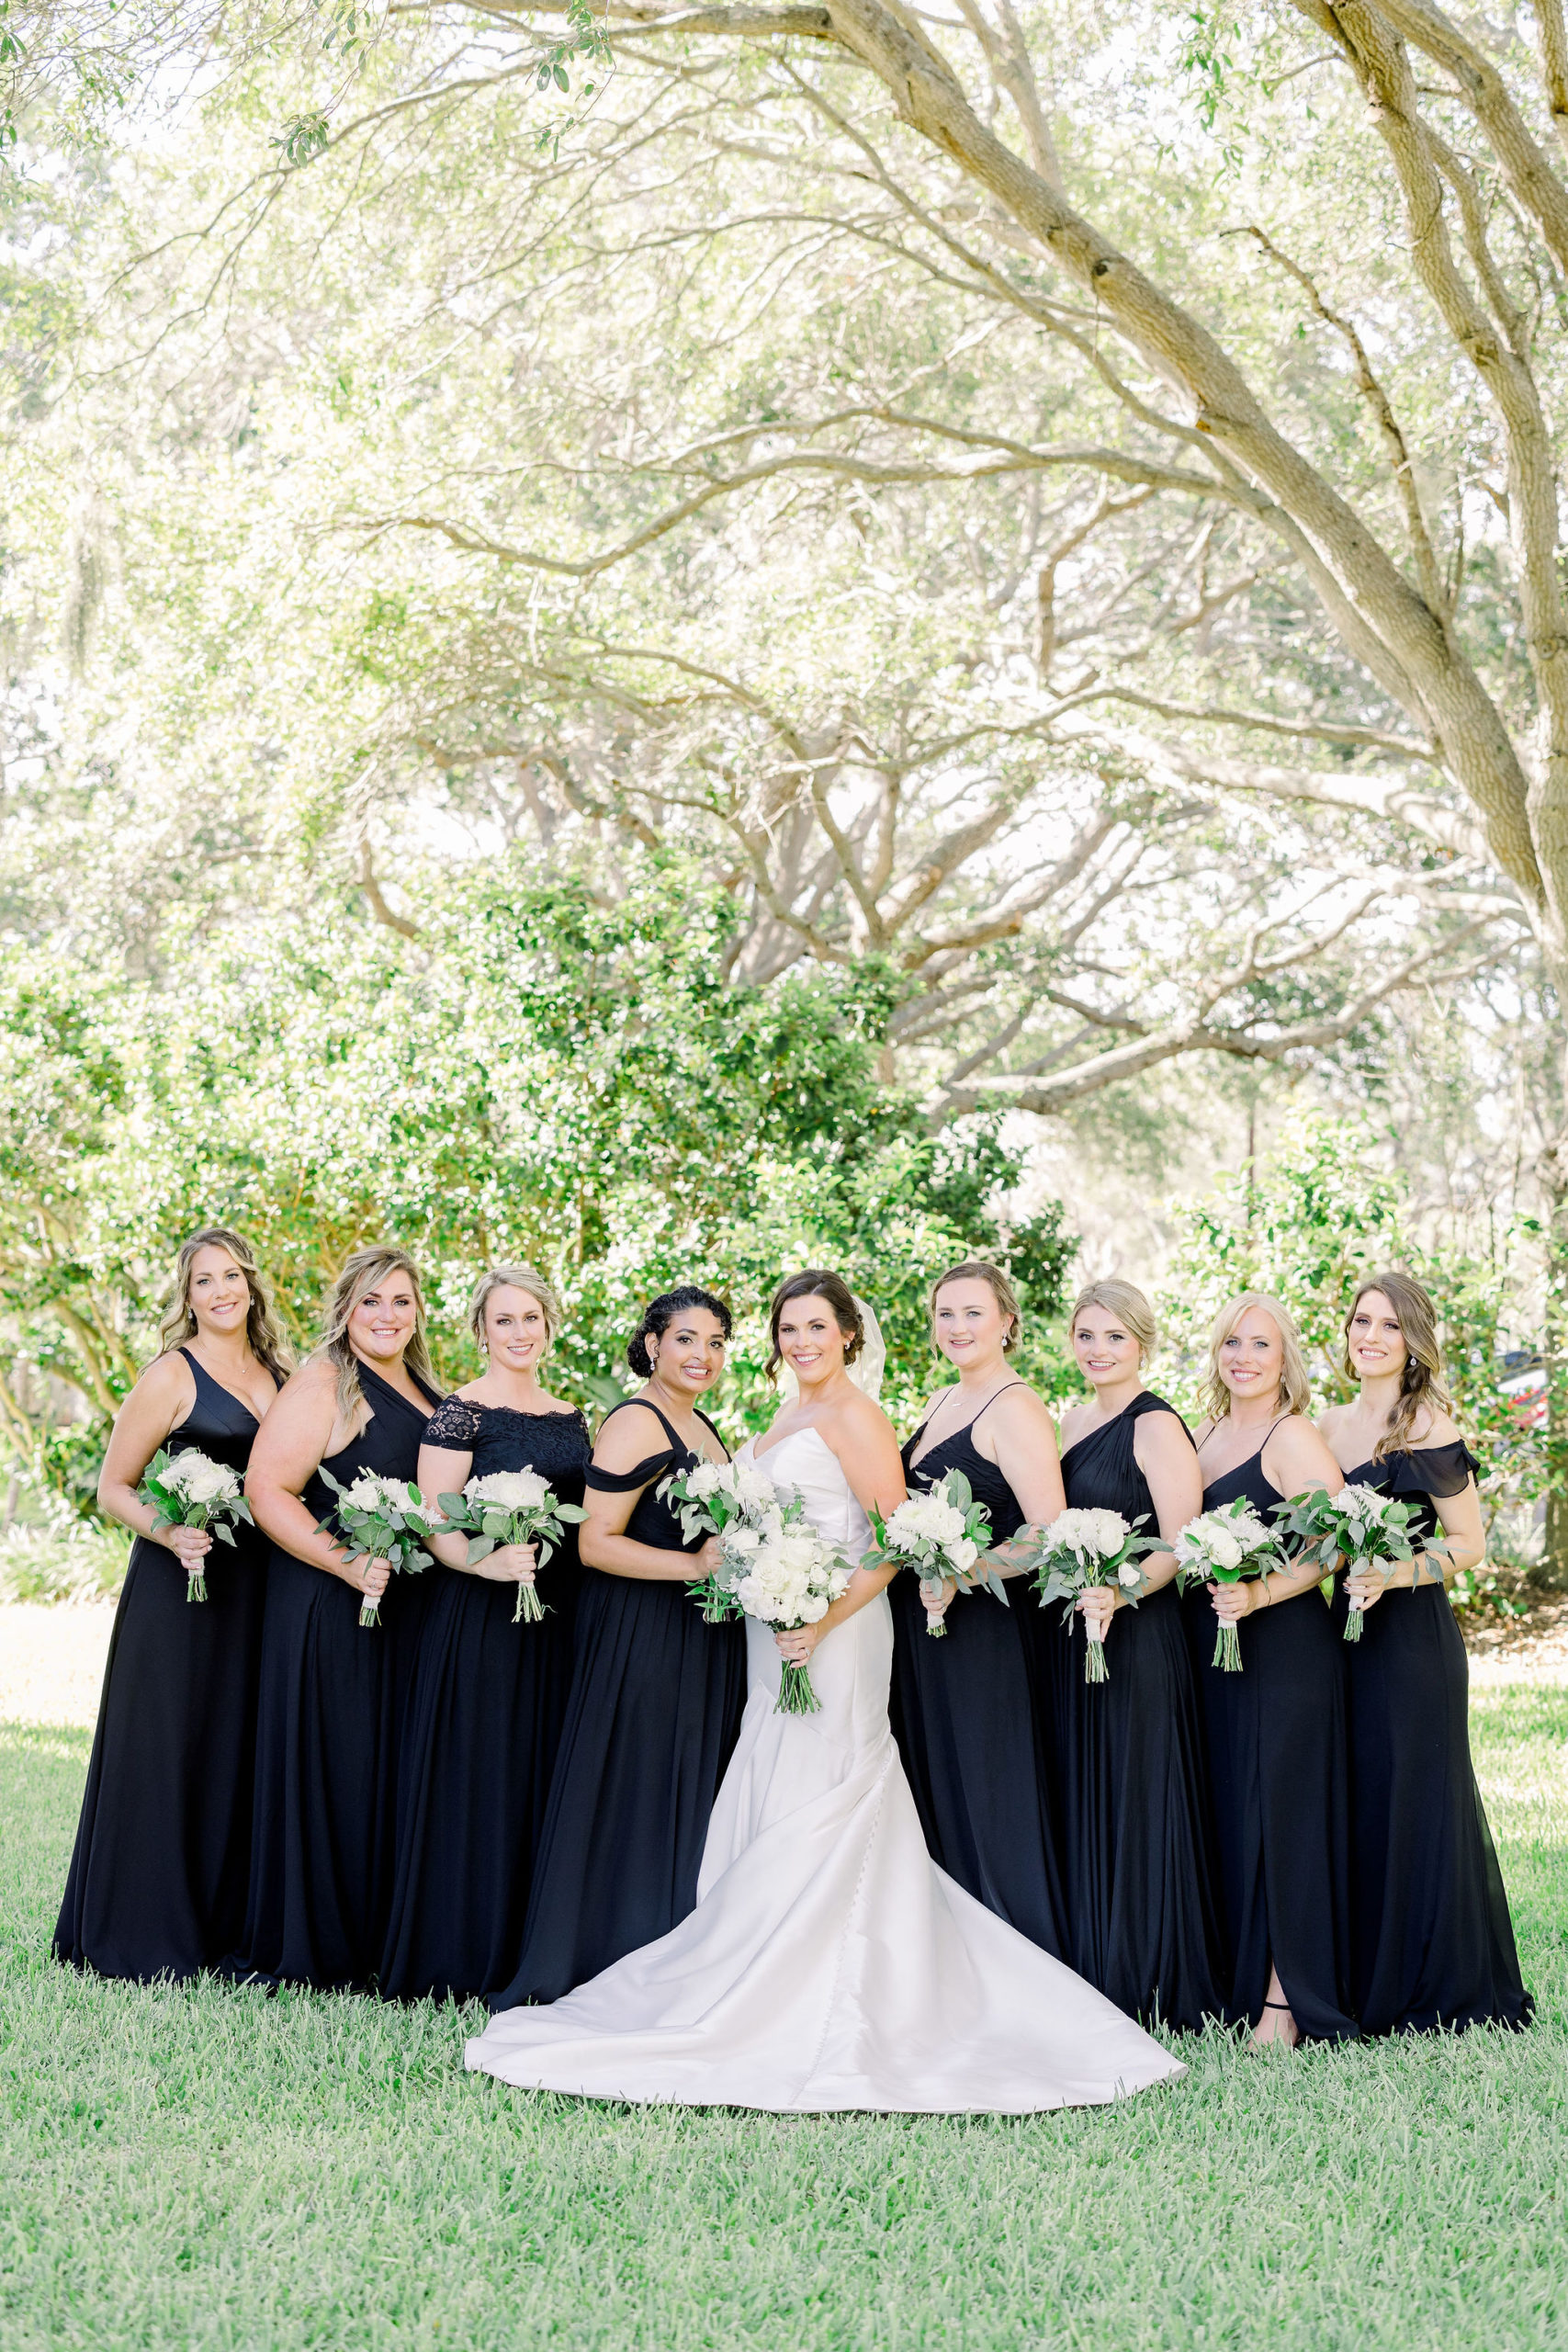 Wedding photographer Jommy Photography captures a portrait of a bride with her bridesmaids with black and white color scheme. Bridal photography at IMG Golf Course in Bradenton by Jommy Photography.
